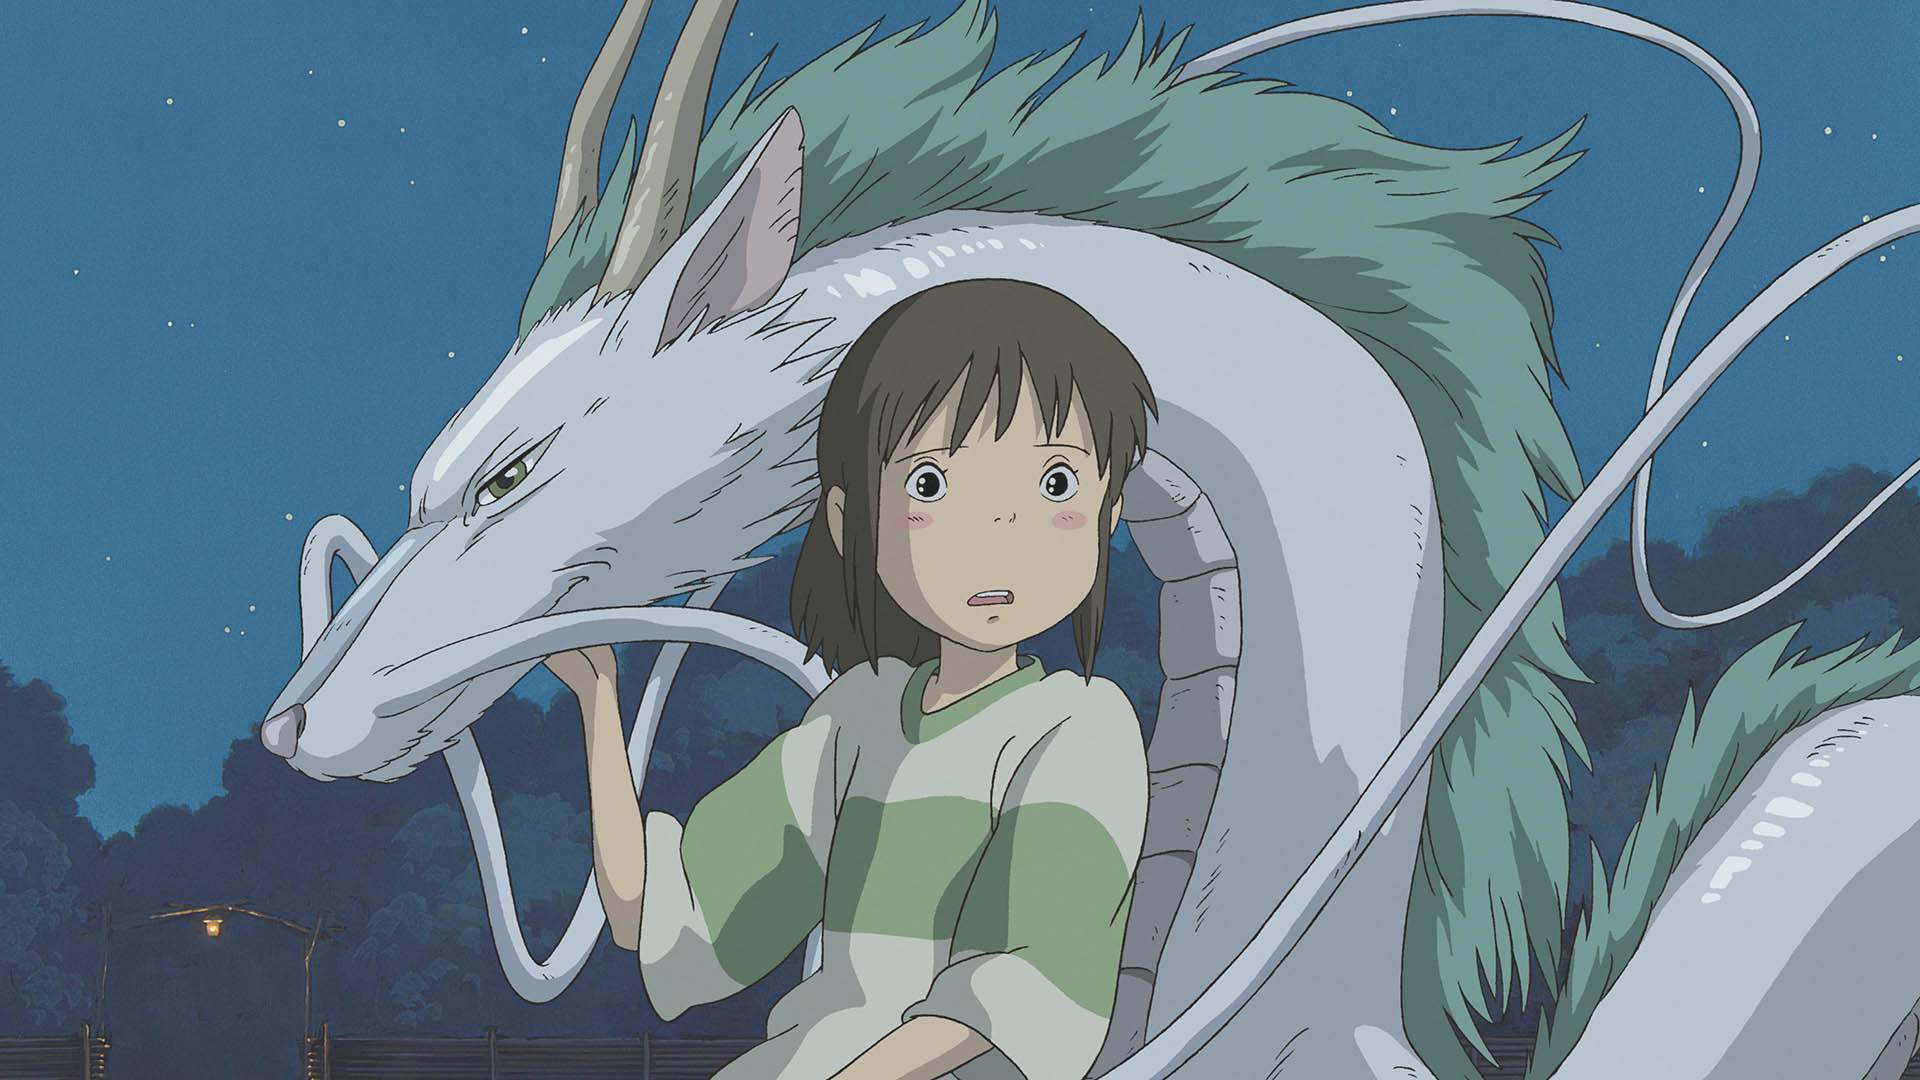 A List of All the Studio Ghibli Movies, Ranked